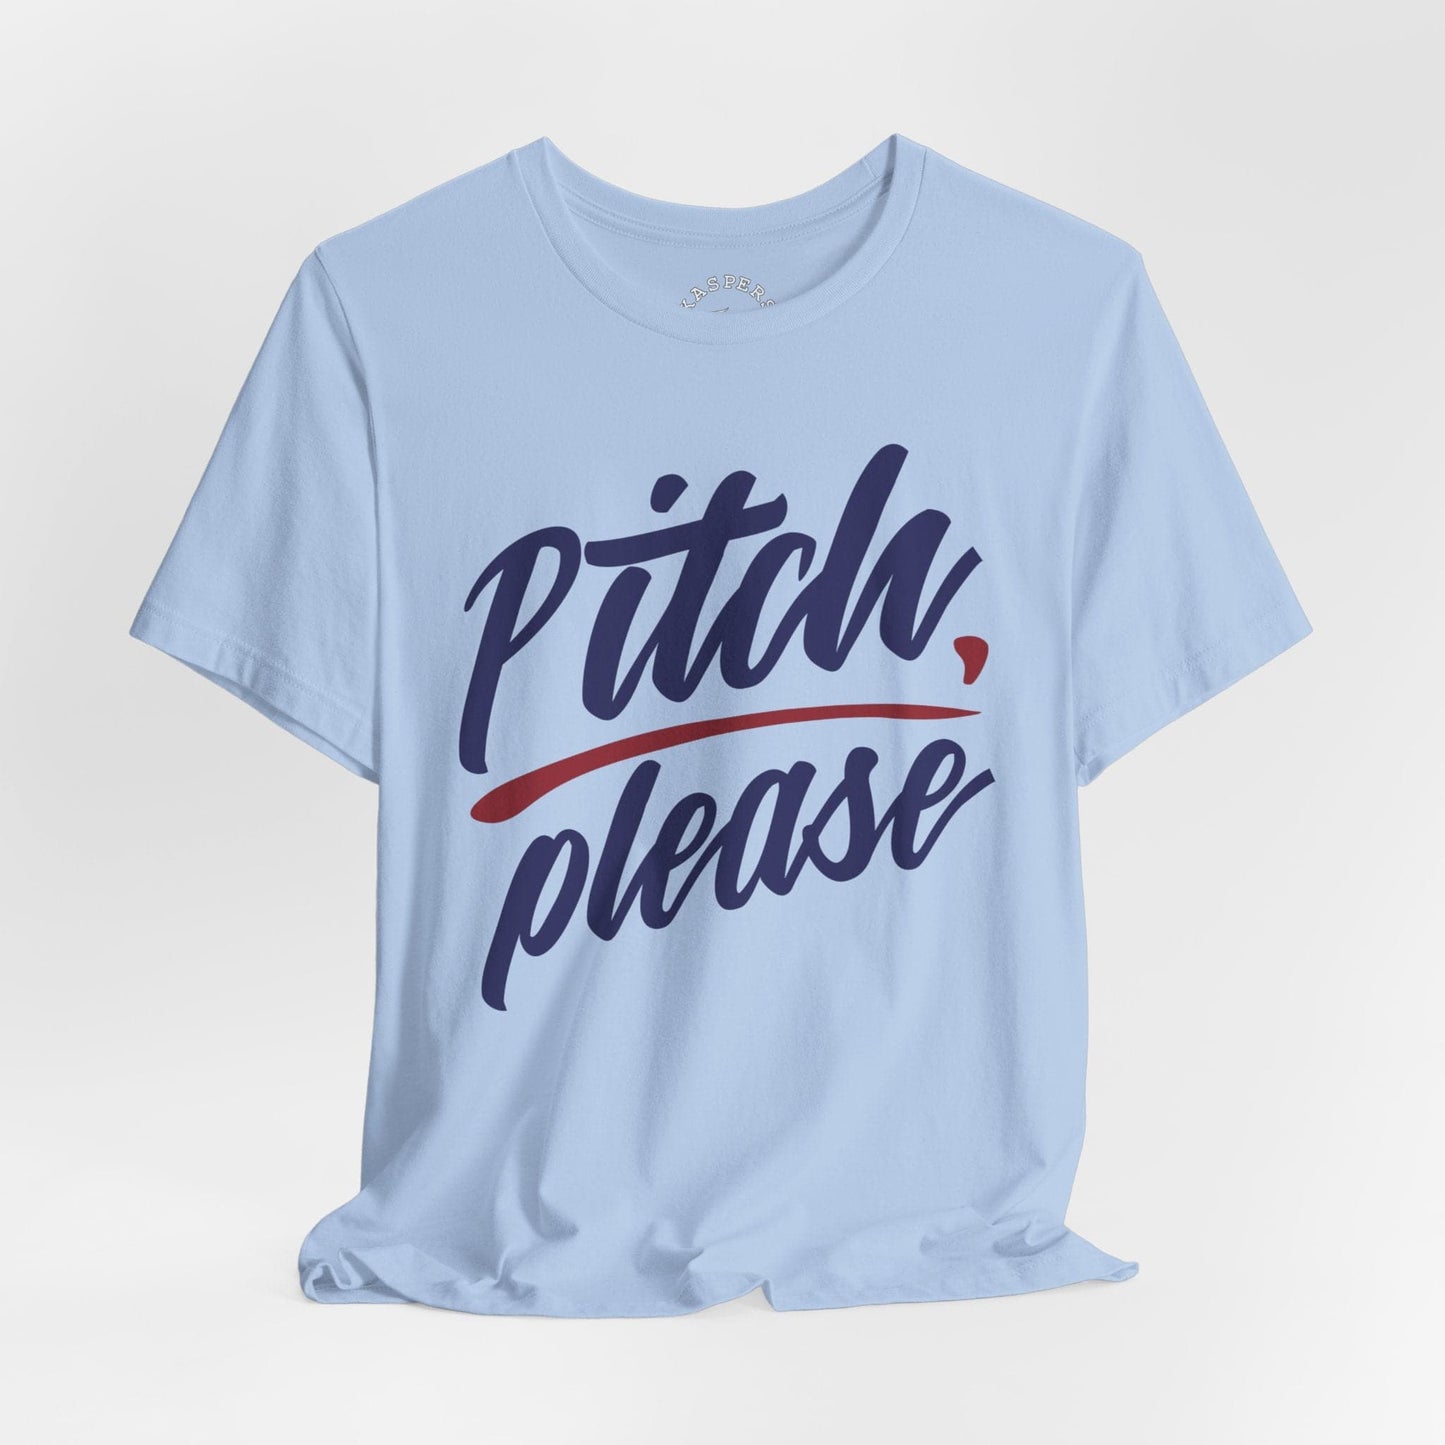 Pitch, Please T-Shirt